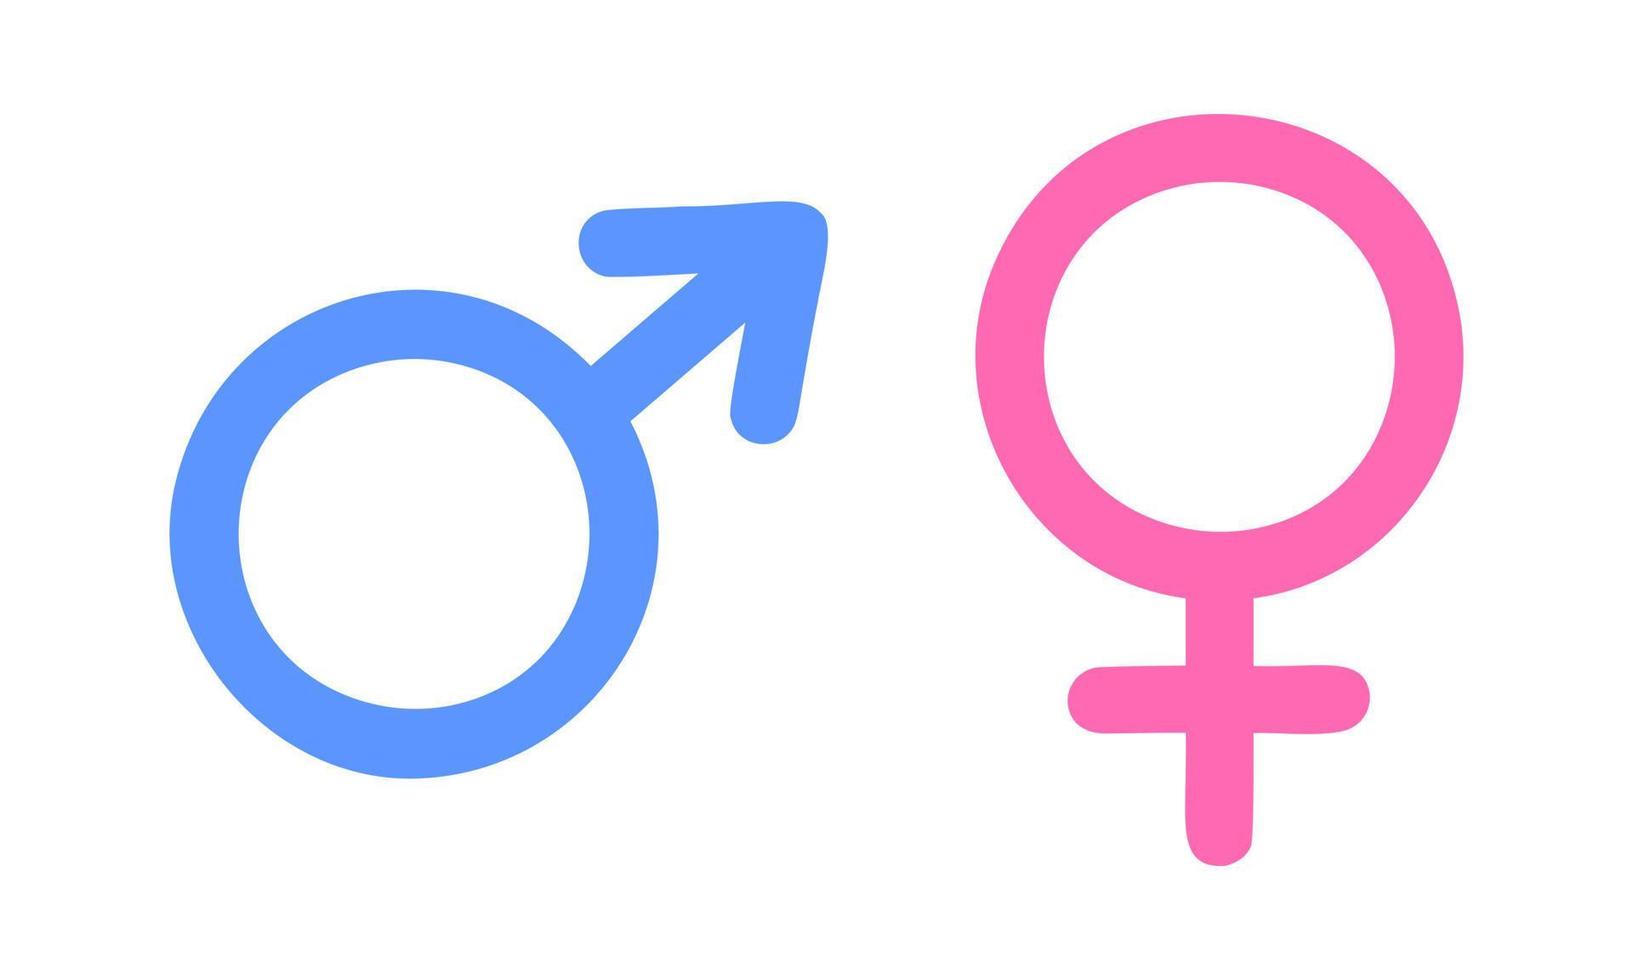 Male and female gender signs. Mars and Venus symbols. Boy or girl, he or she concept vector